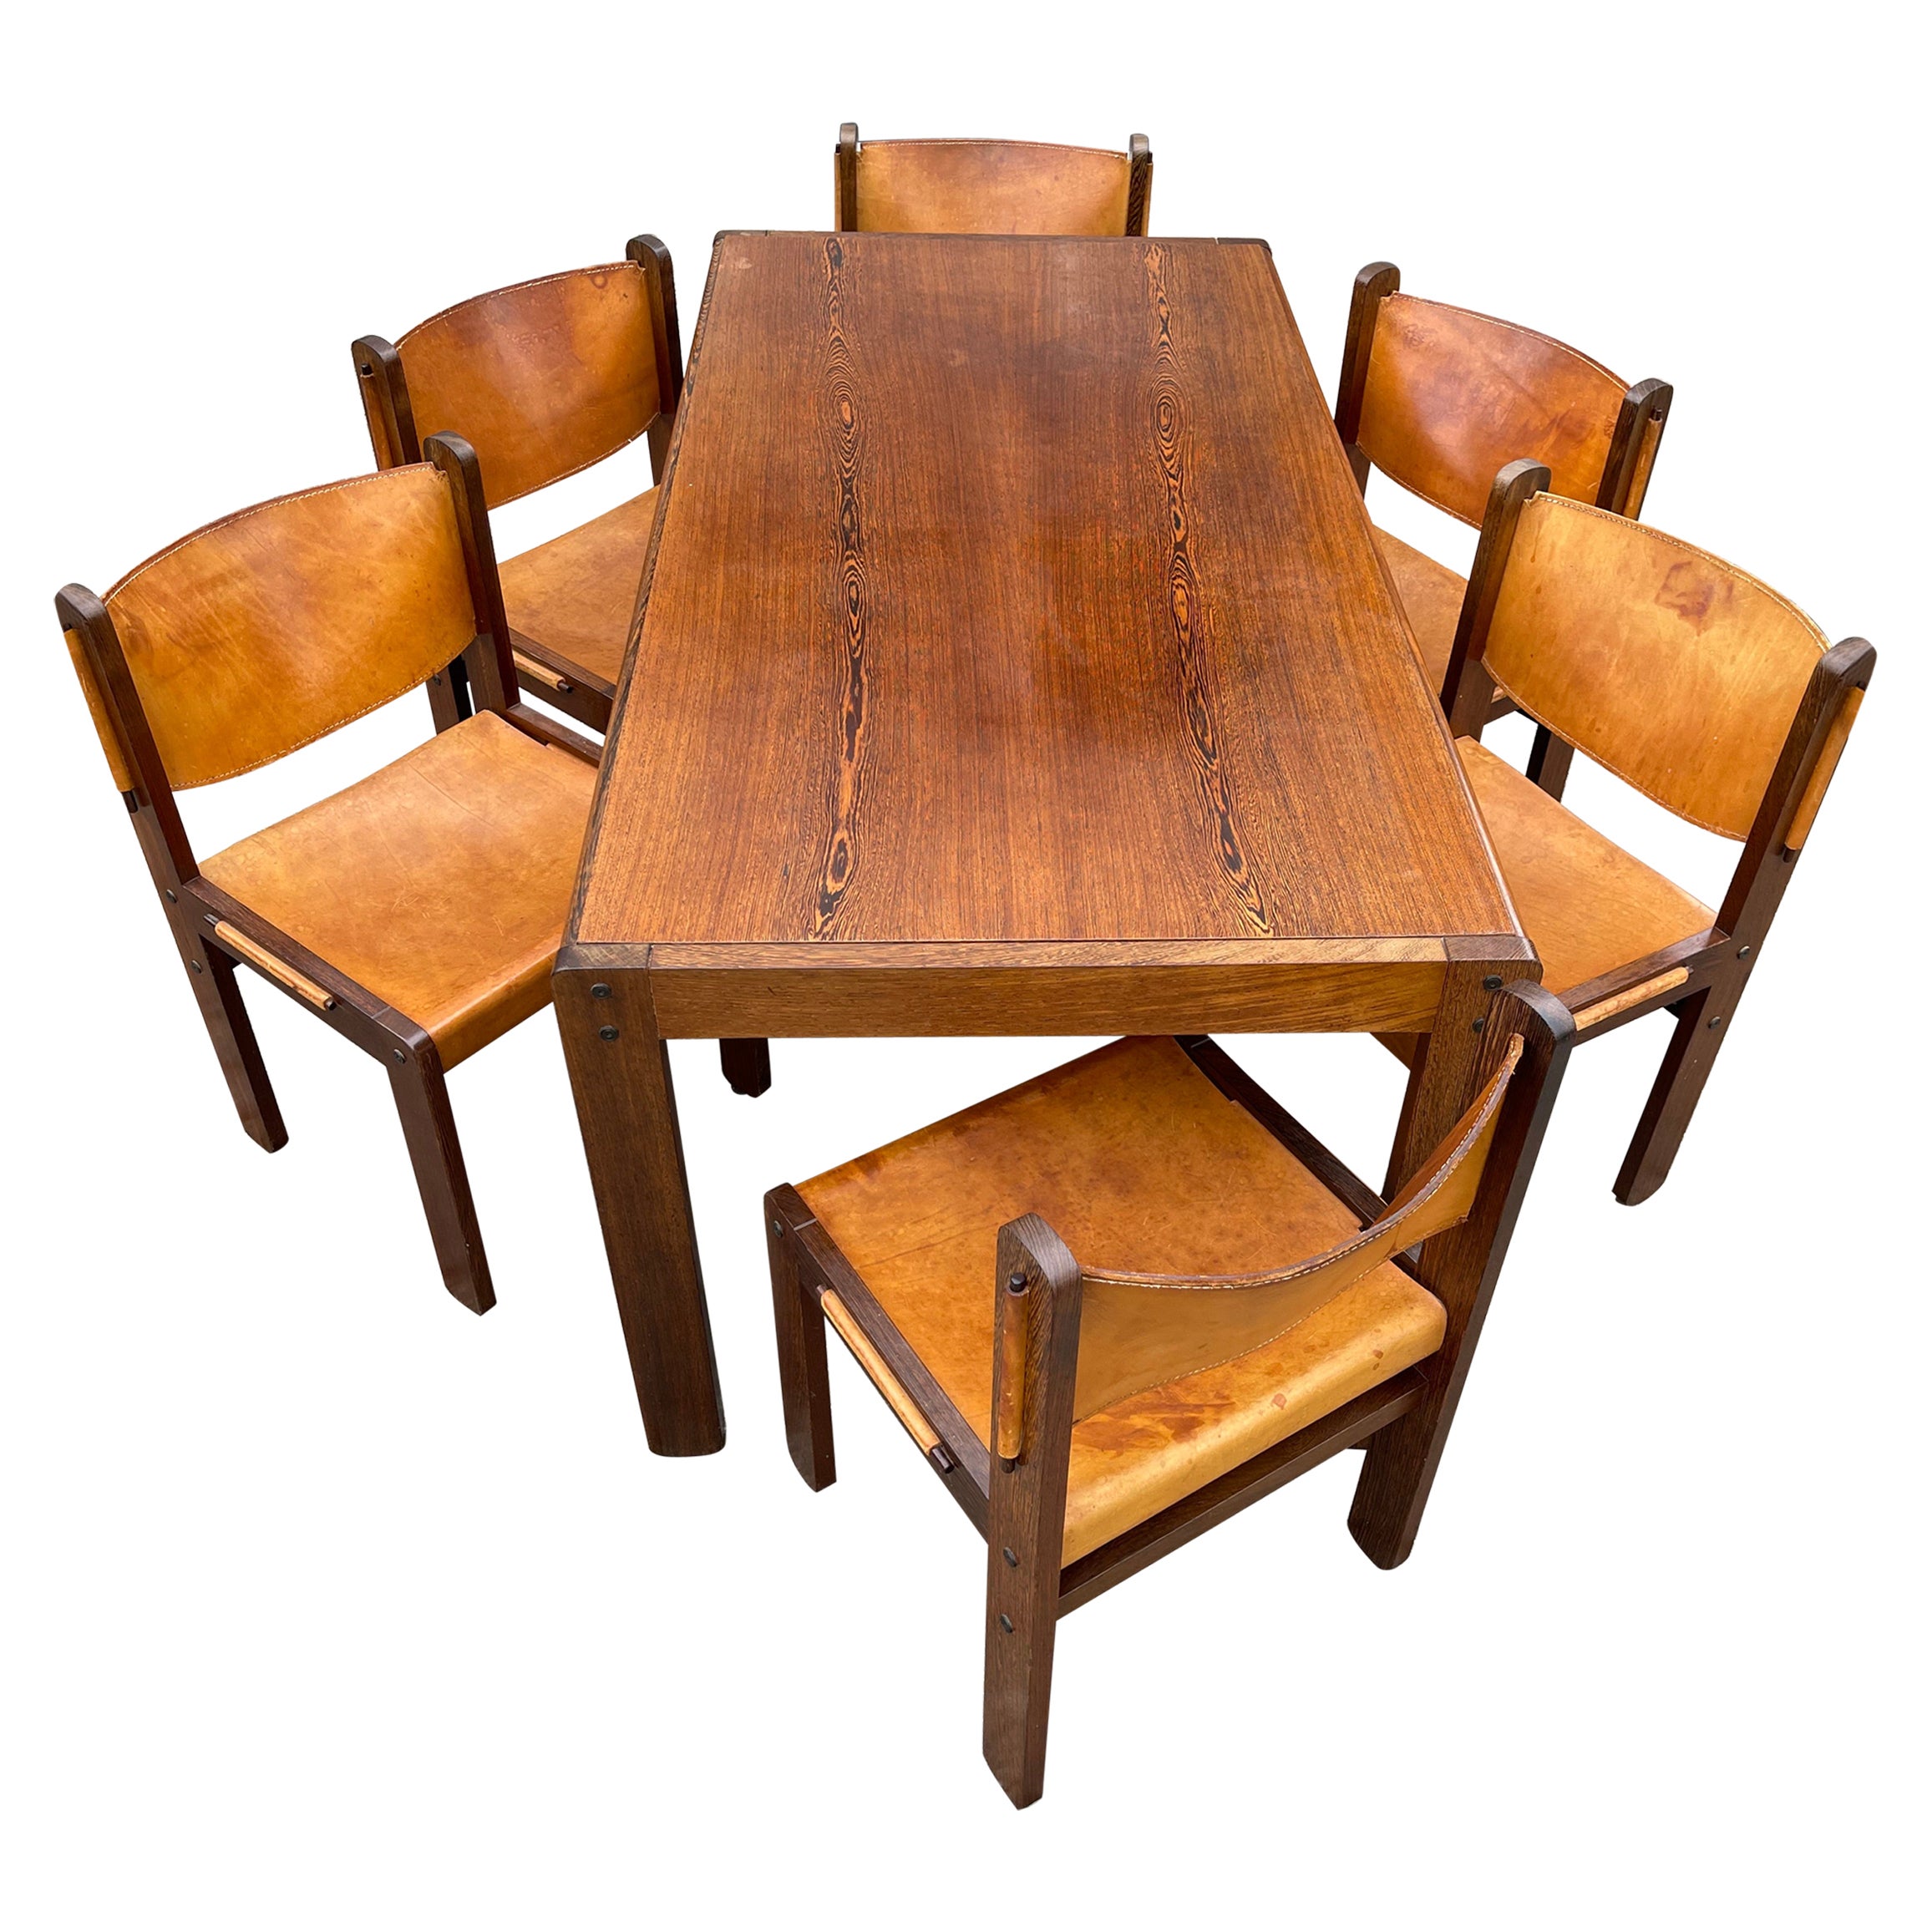 Stunning Midcentury Modern Wengé & Leather Dining Table Set with 6 Chairs, 1970s